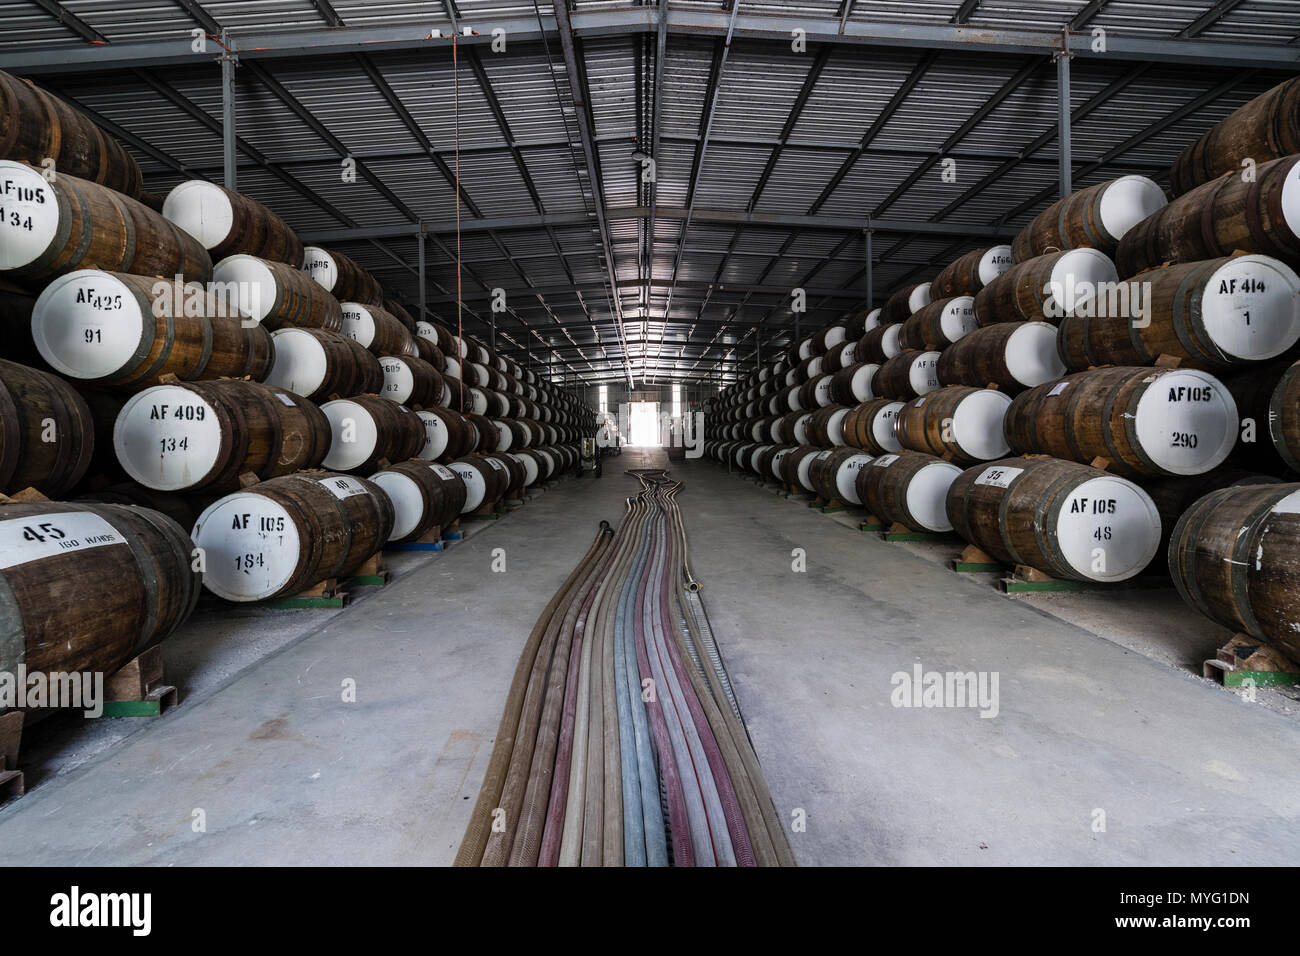 An enormous collection of wine barrels stacked and stored in a shed to age and mature. Stock Photo